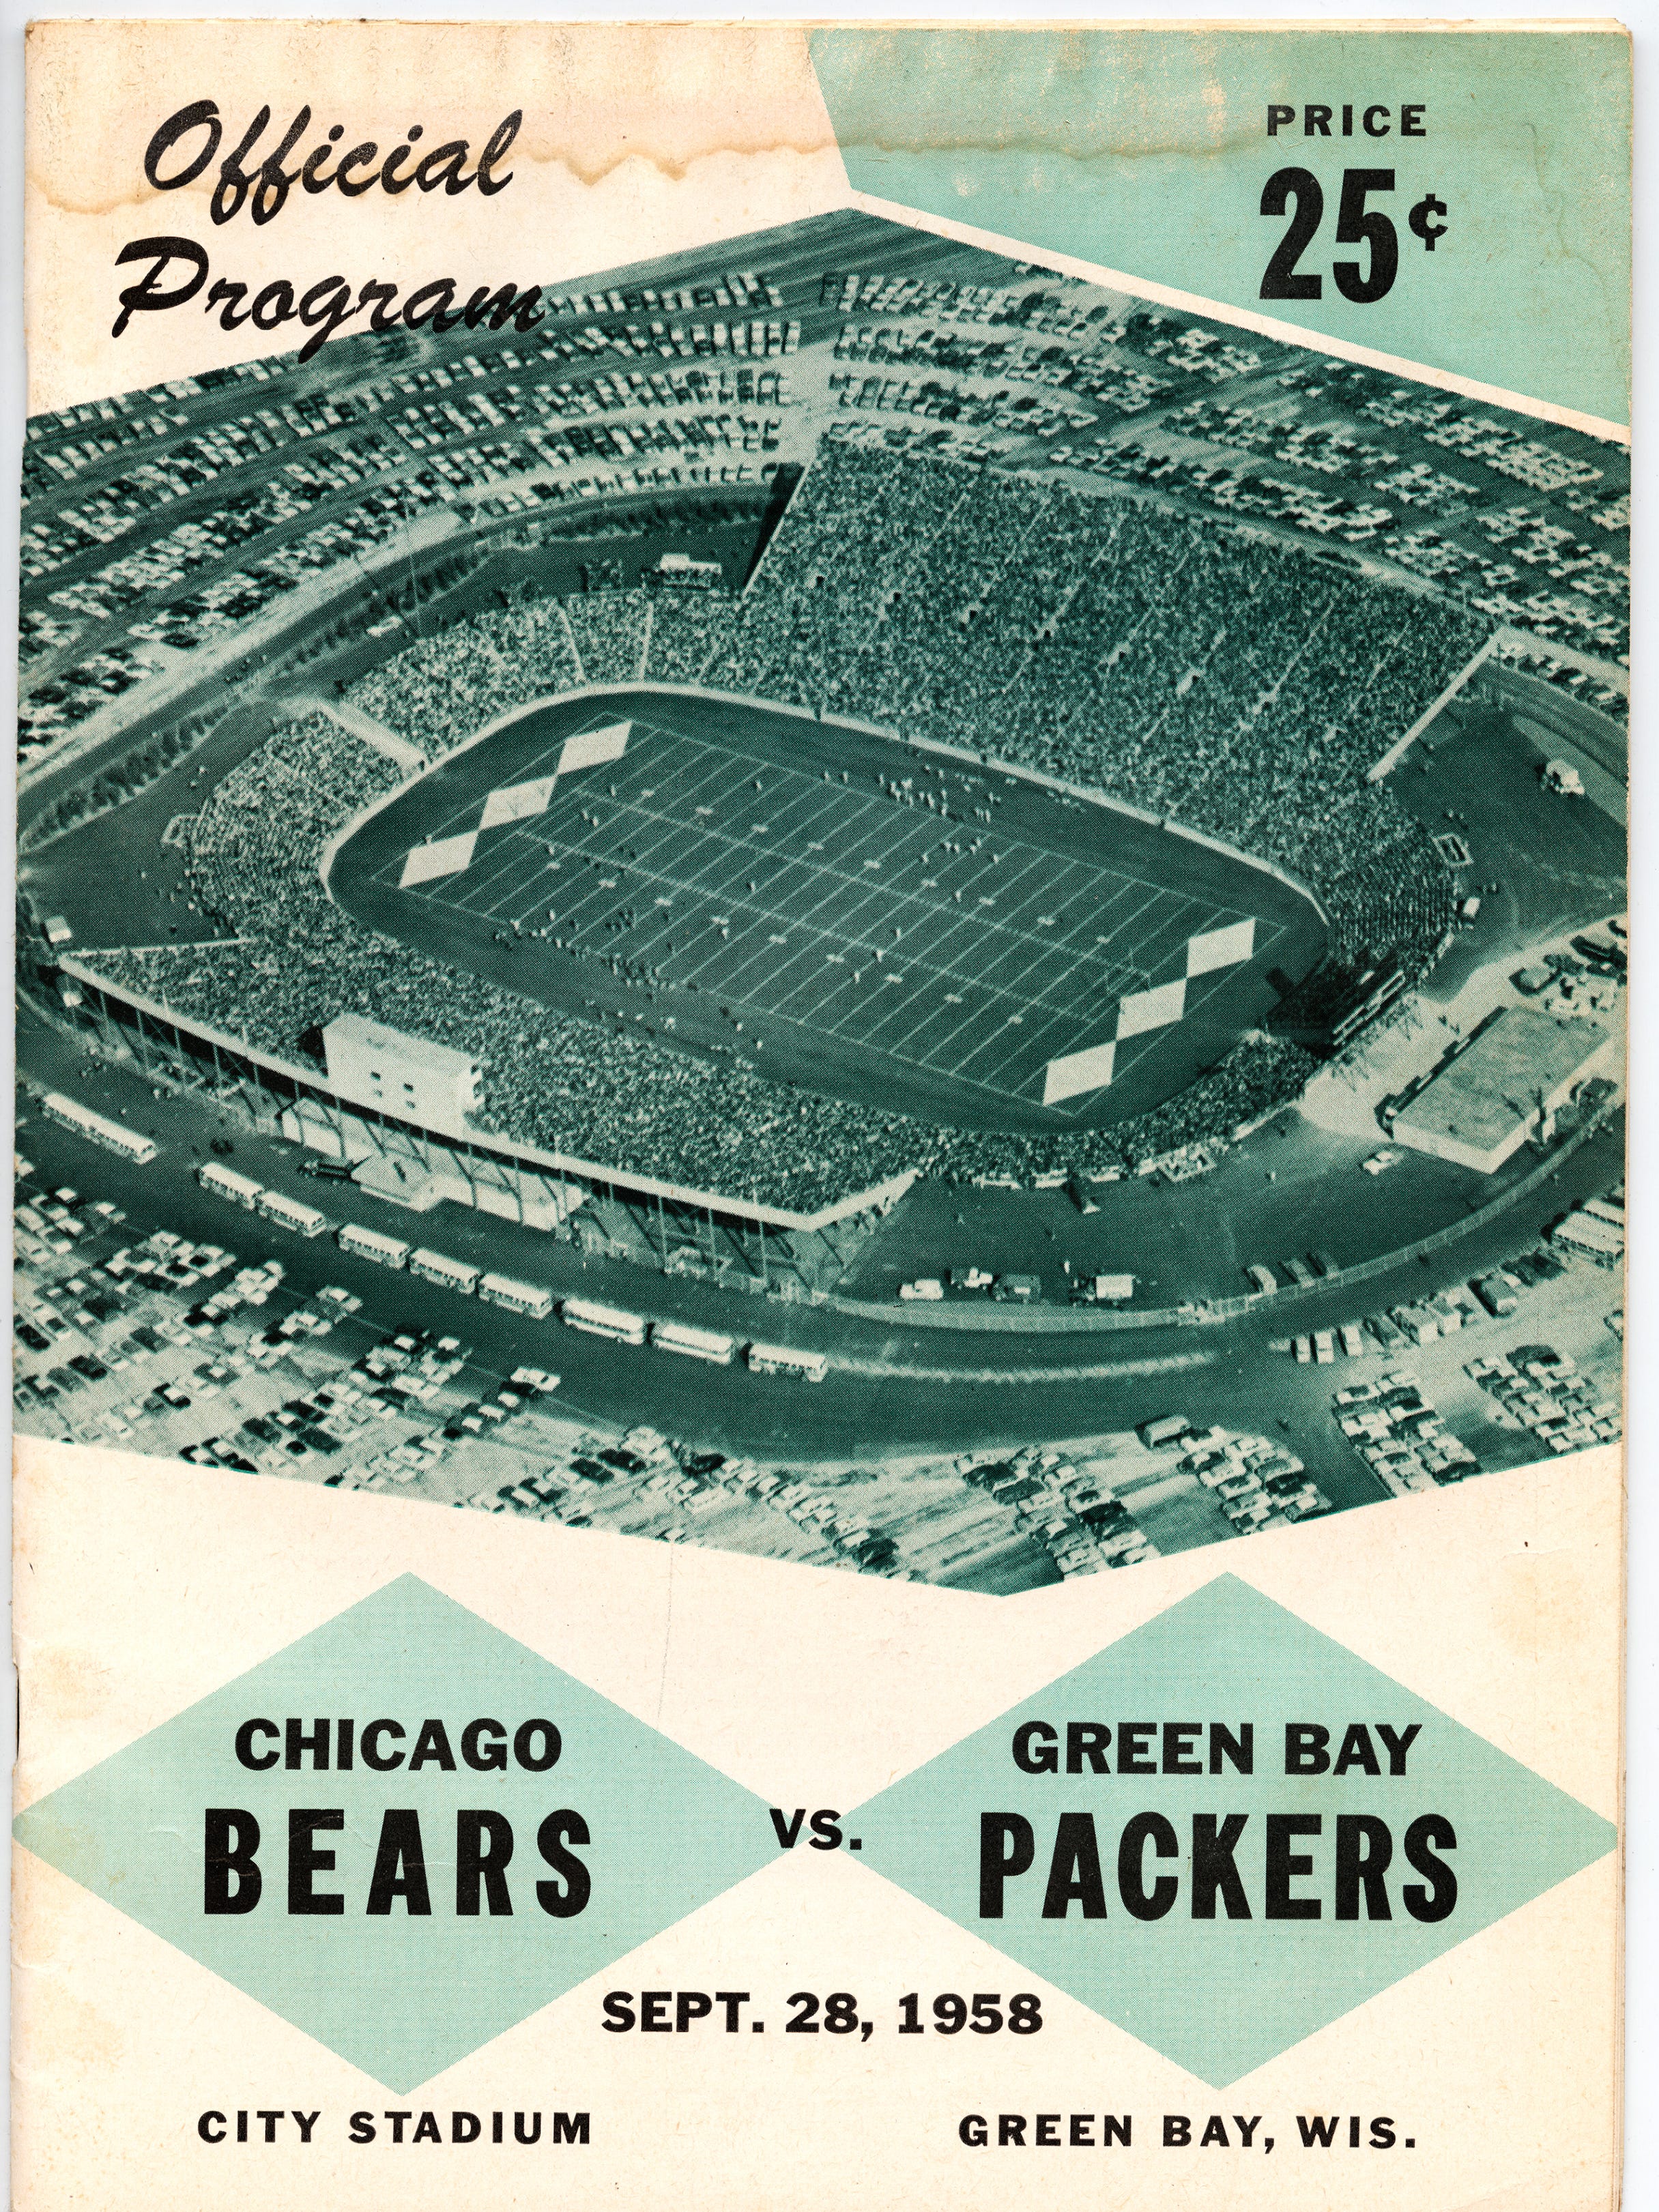 The official game program from the Sept. 29, 1959 game at Lambeau Field, then called City Stadium.